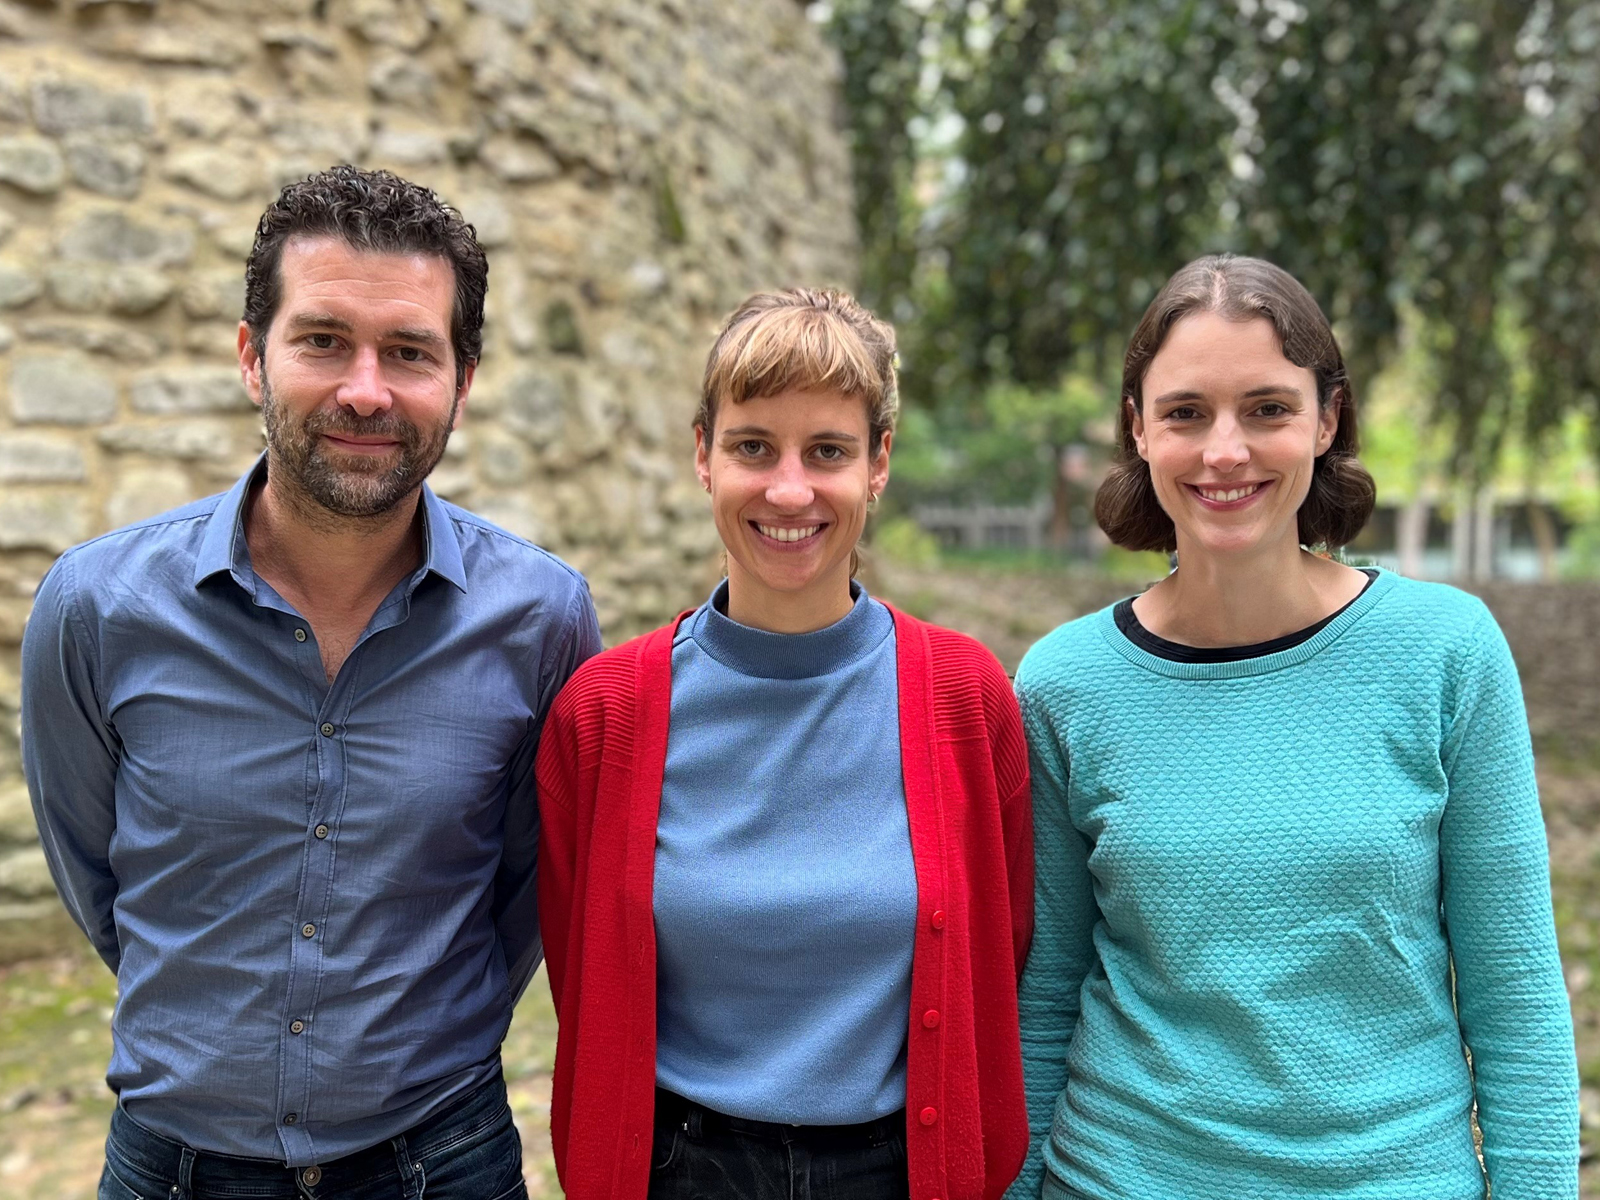 Photograph of authors of the featured article. Pictured together from left to right: Tom Beckers, Natalie Schroyens, and Laura Luyten